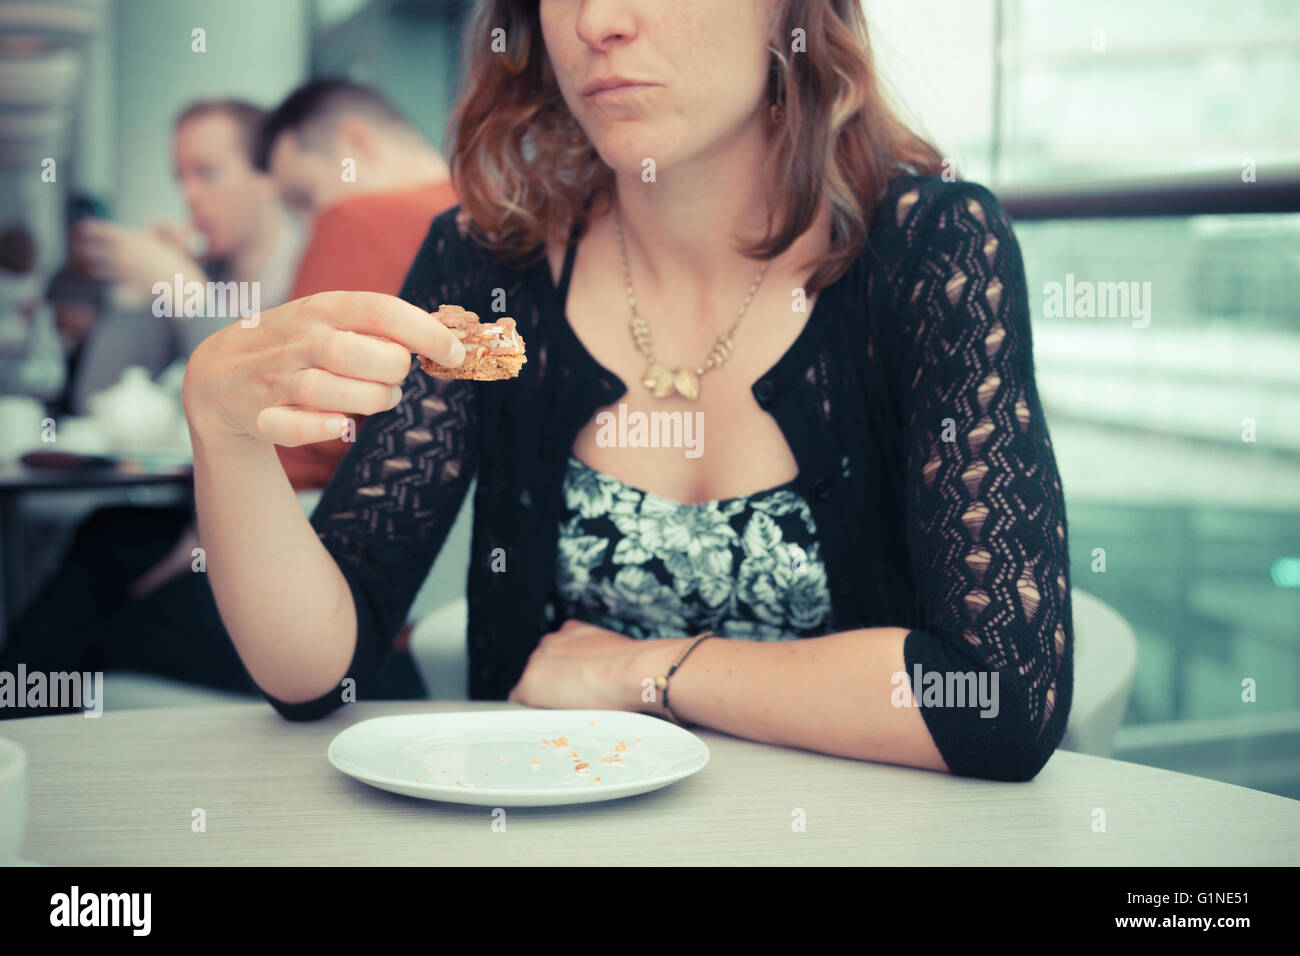 A young woman is having coffee and cake by the window in an airport Stock Photo